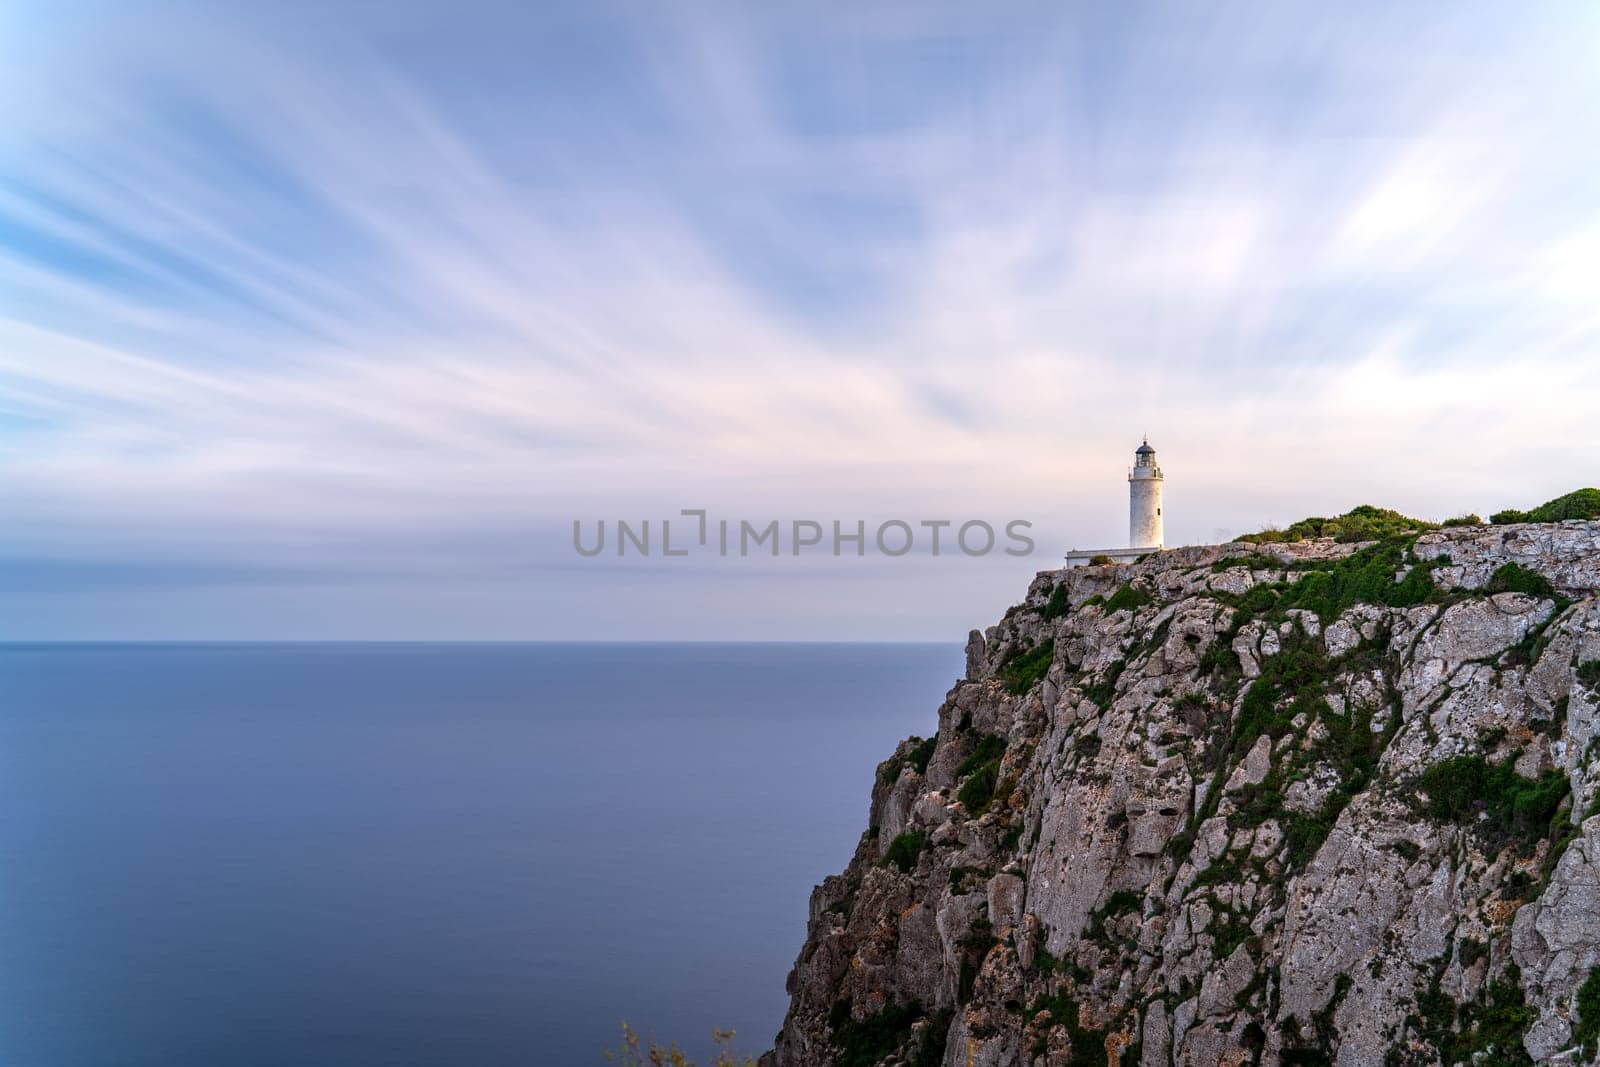 Long-exposure shot of a lighthouse on a cliff, featuring a smooth sea and fluffy clouds, conveys solitude.